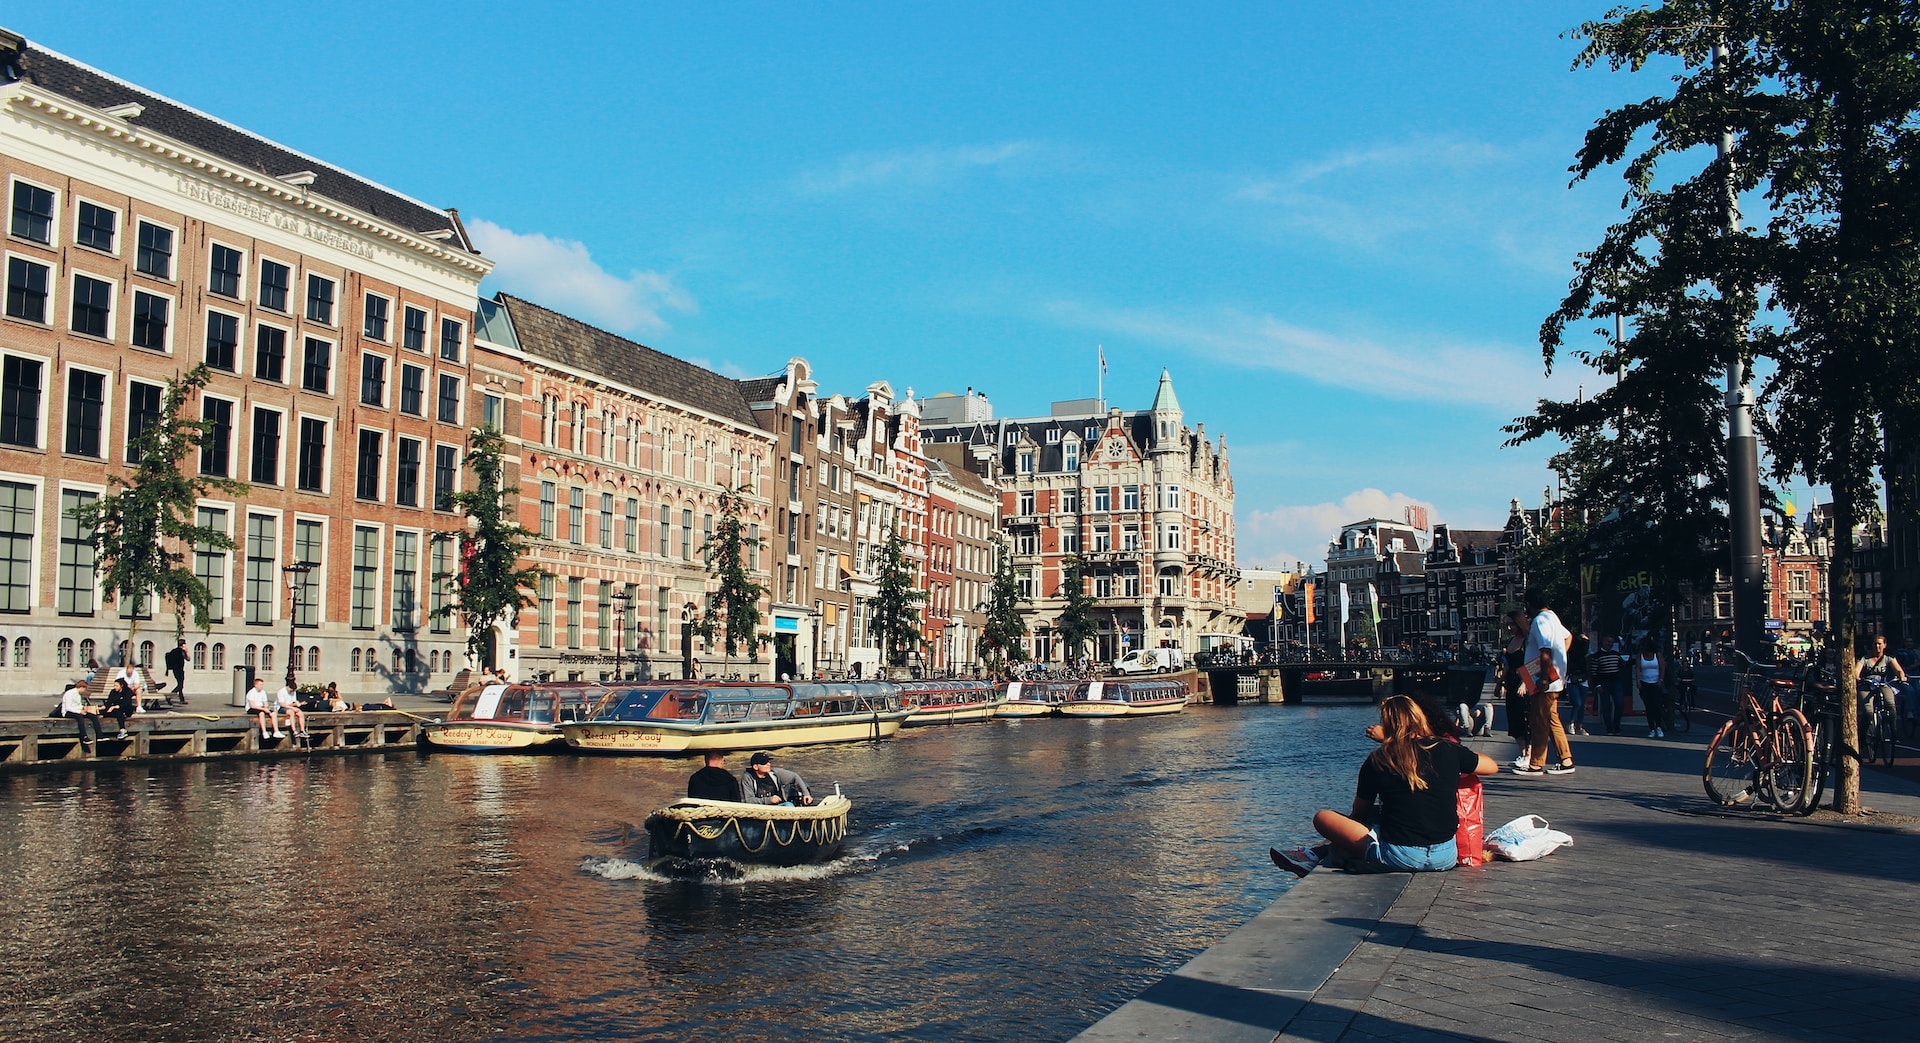 A view of a canal in Amsterdam.